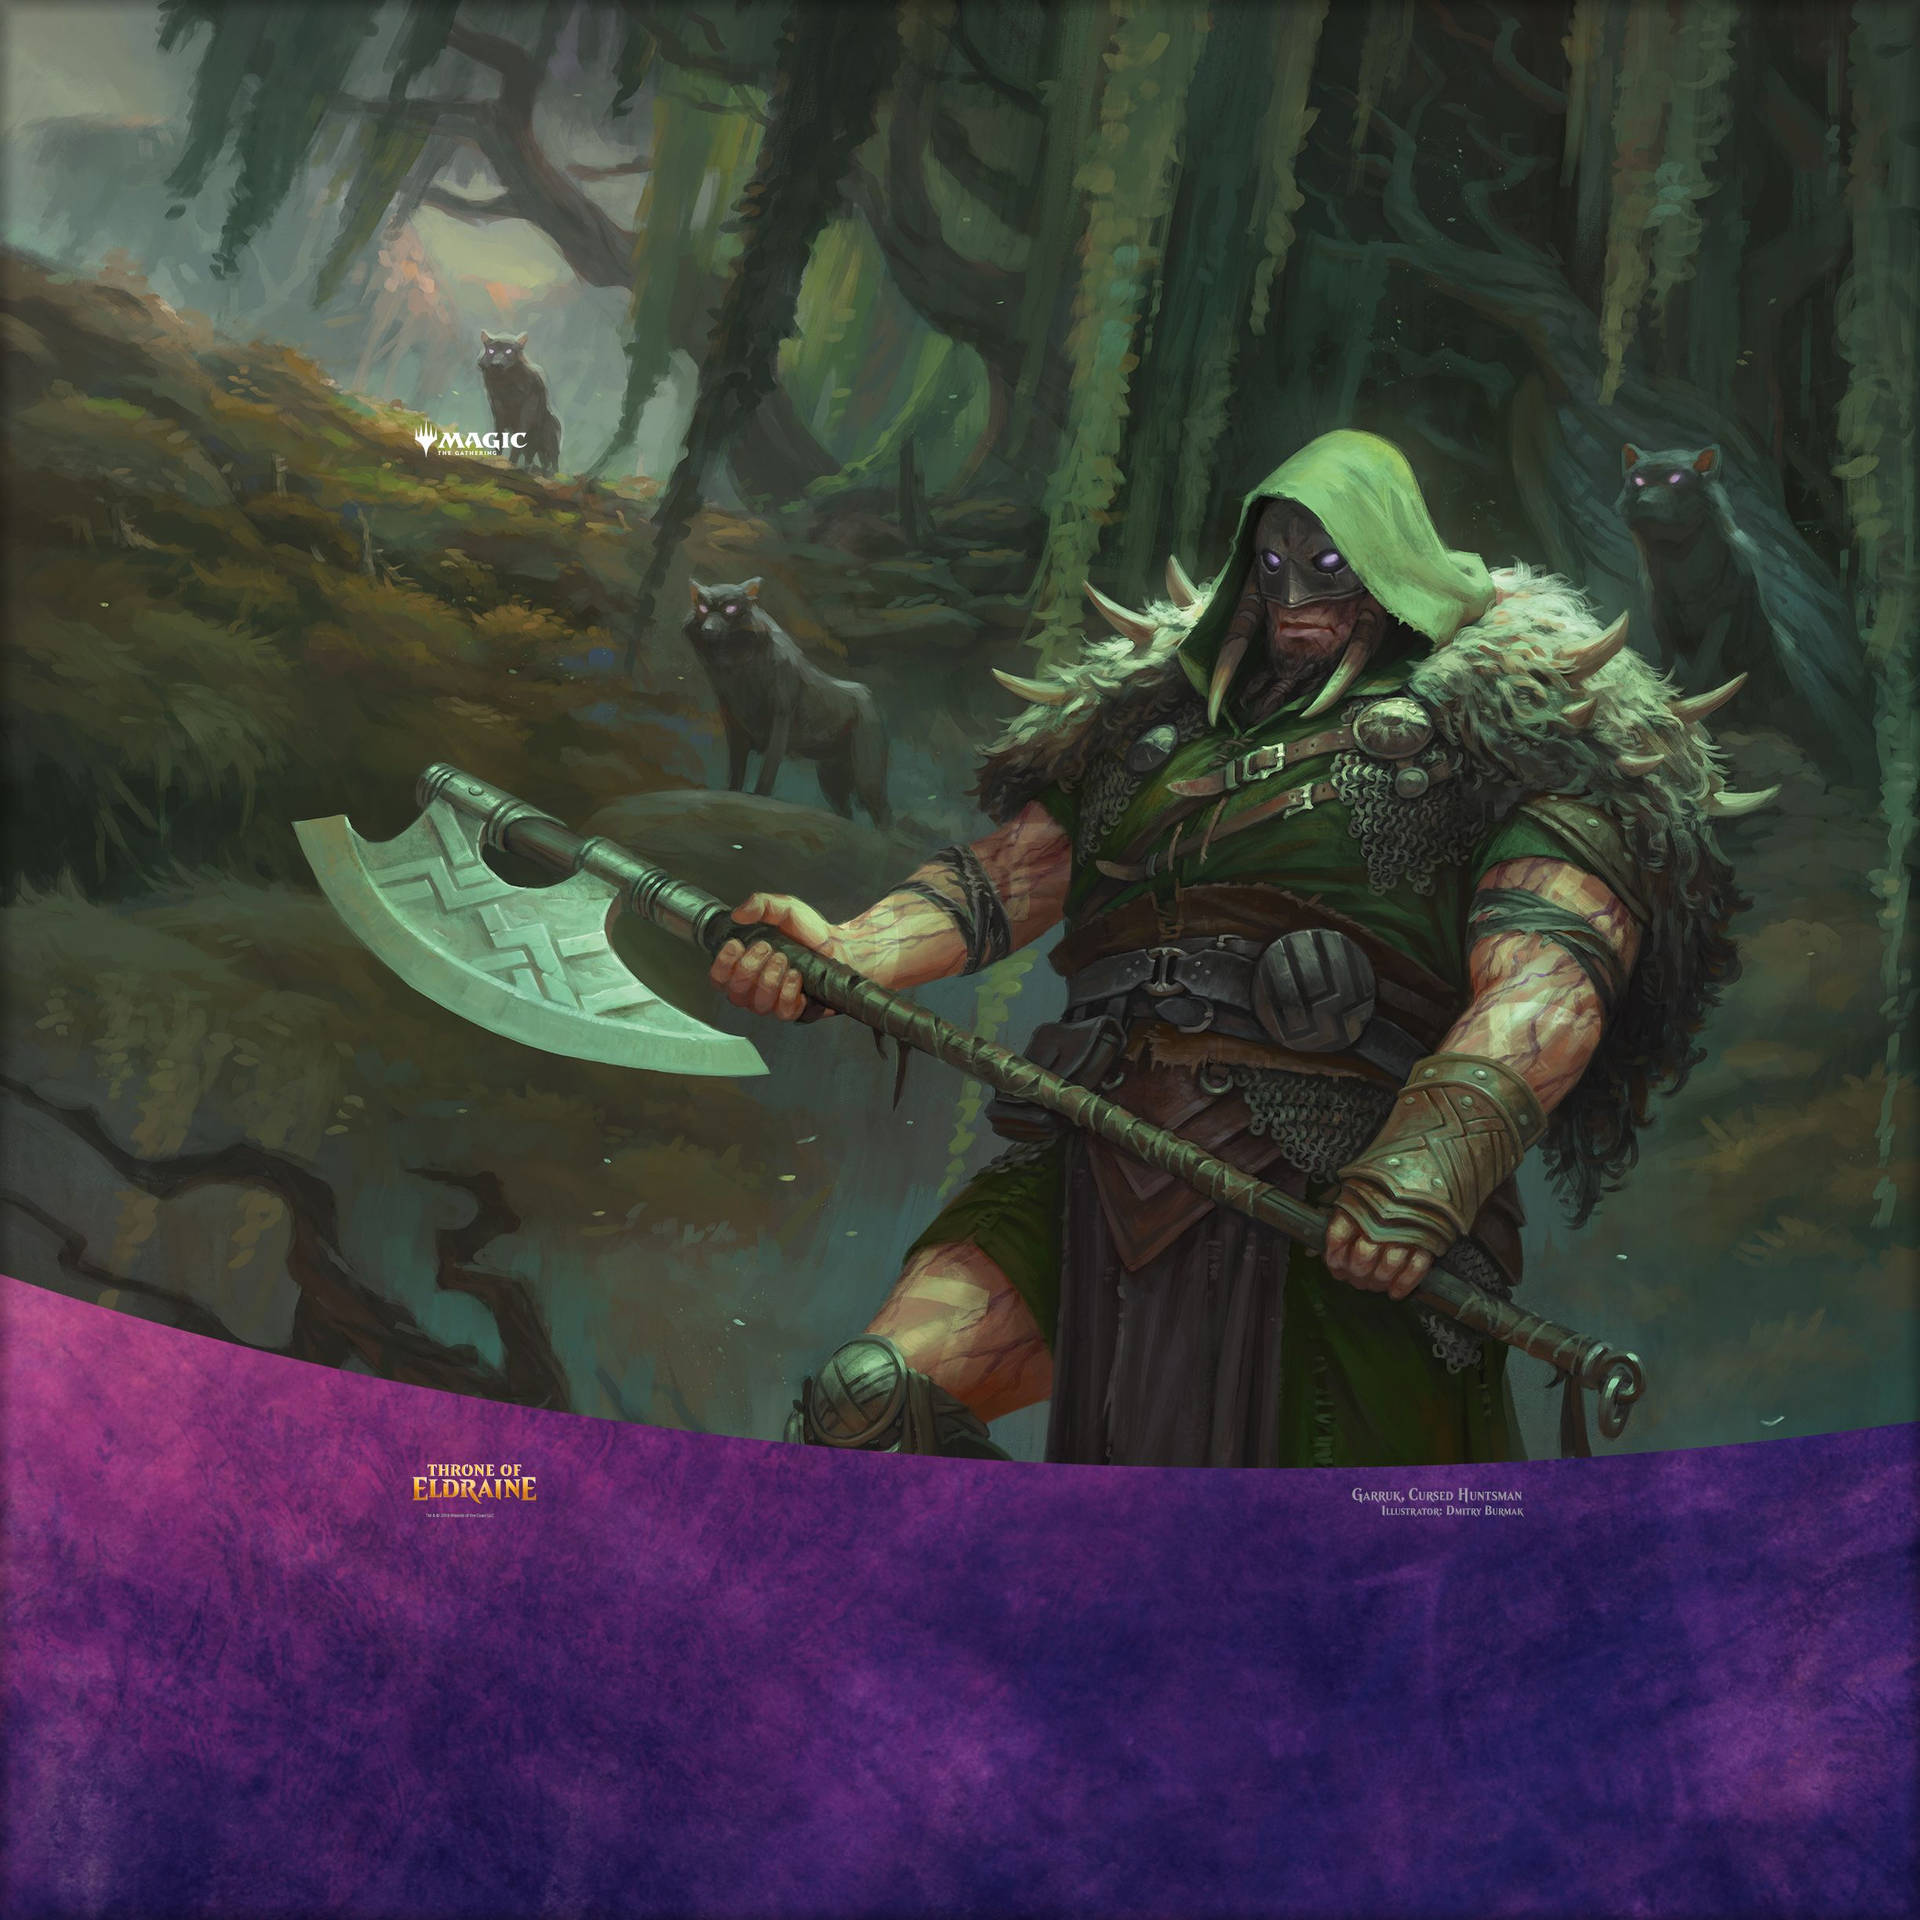 Garruk, the Cursed Huntsman, a powerful Planeswalker from the Magic The Gathering universe. Wallpaper